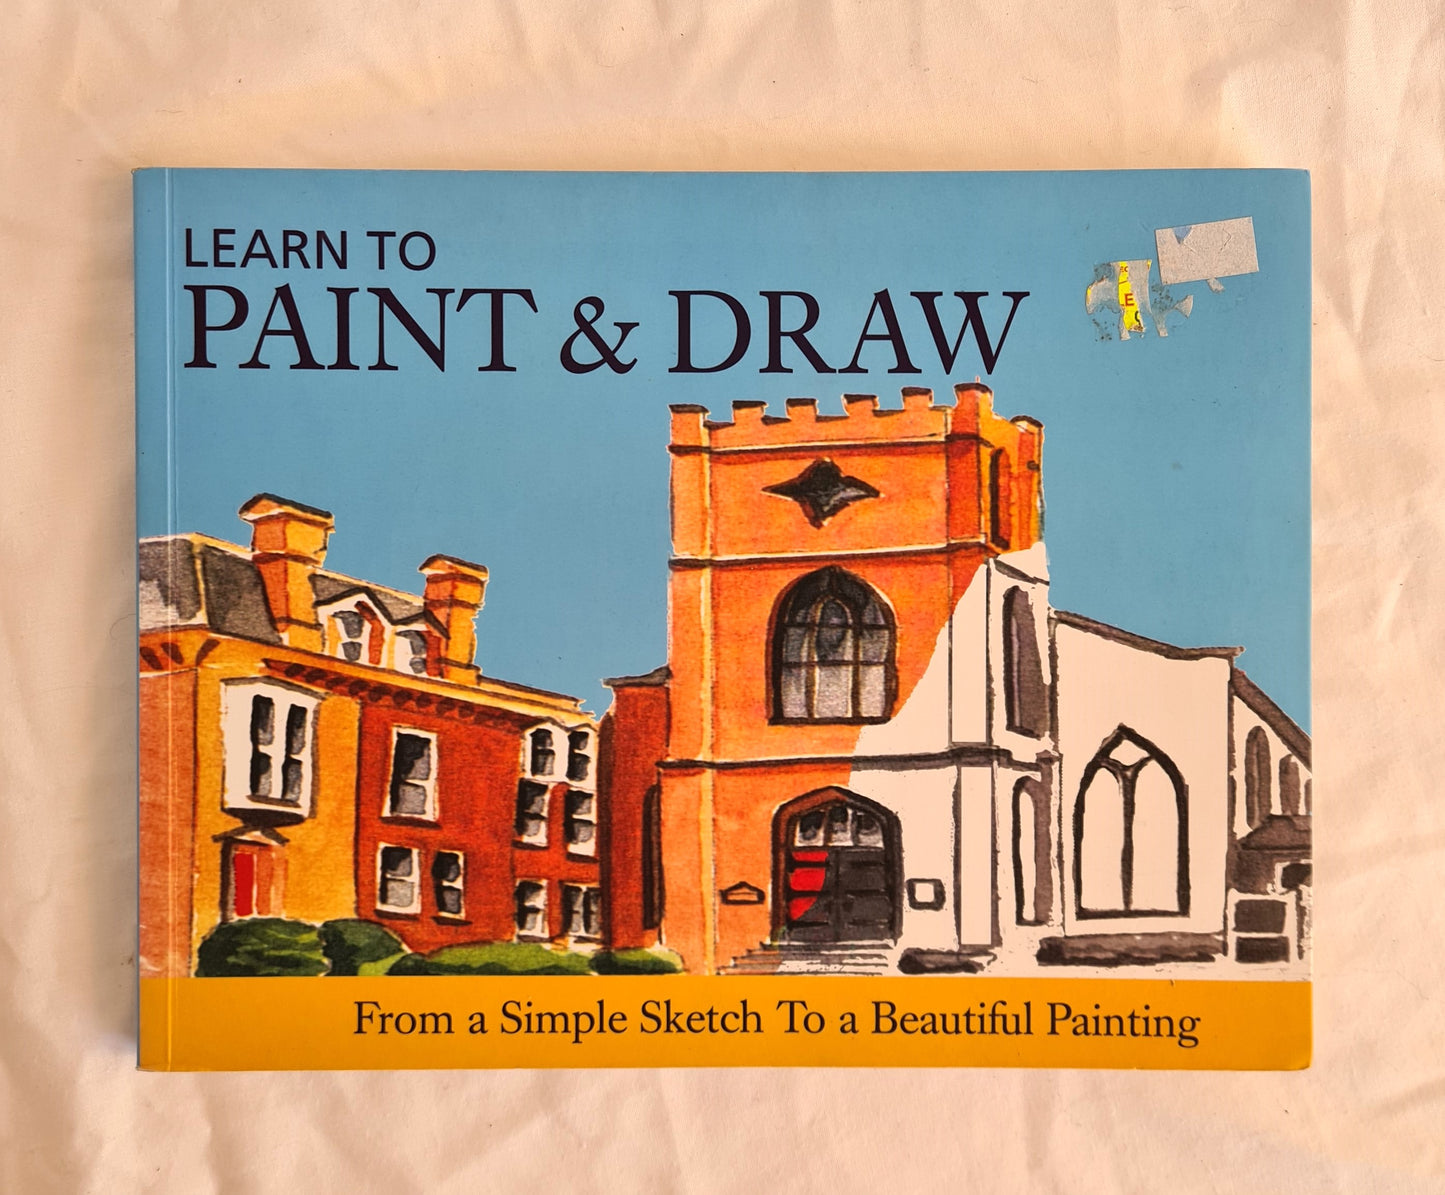 Learn to Paint & Draw  From a Simple Sketch to a Beautiful Painting  by Sarah Green and Chris Christoforou